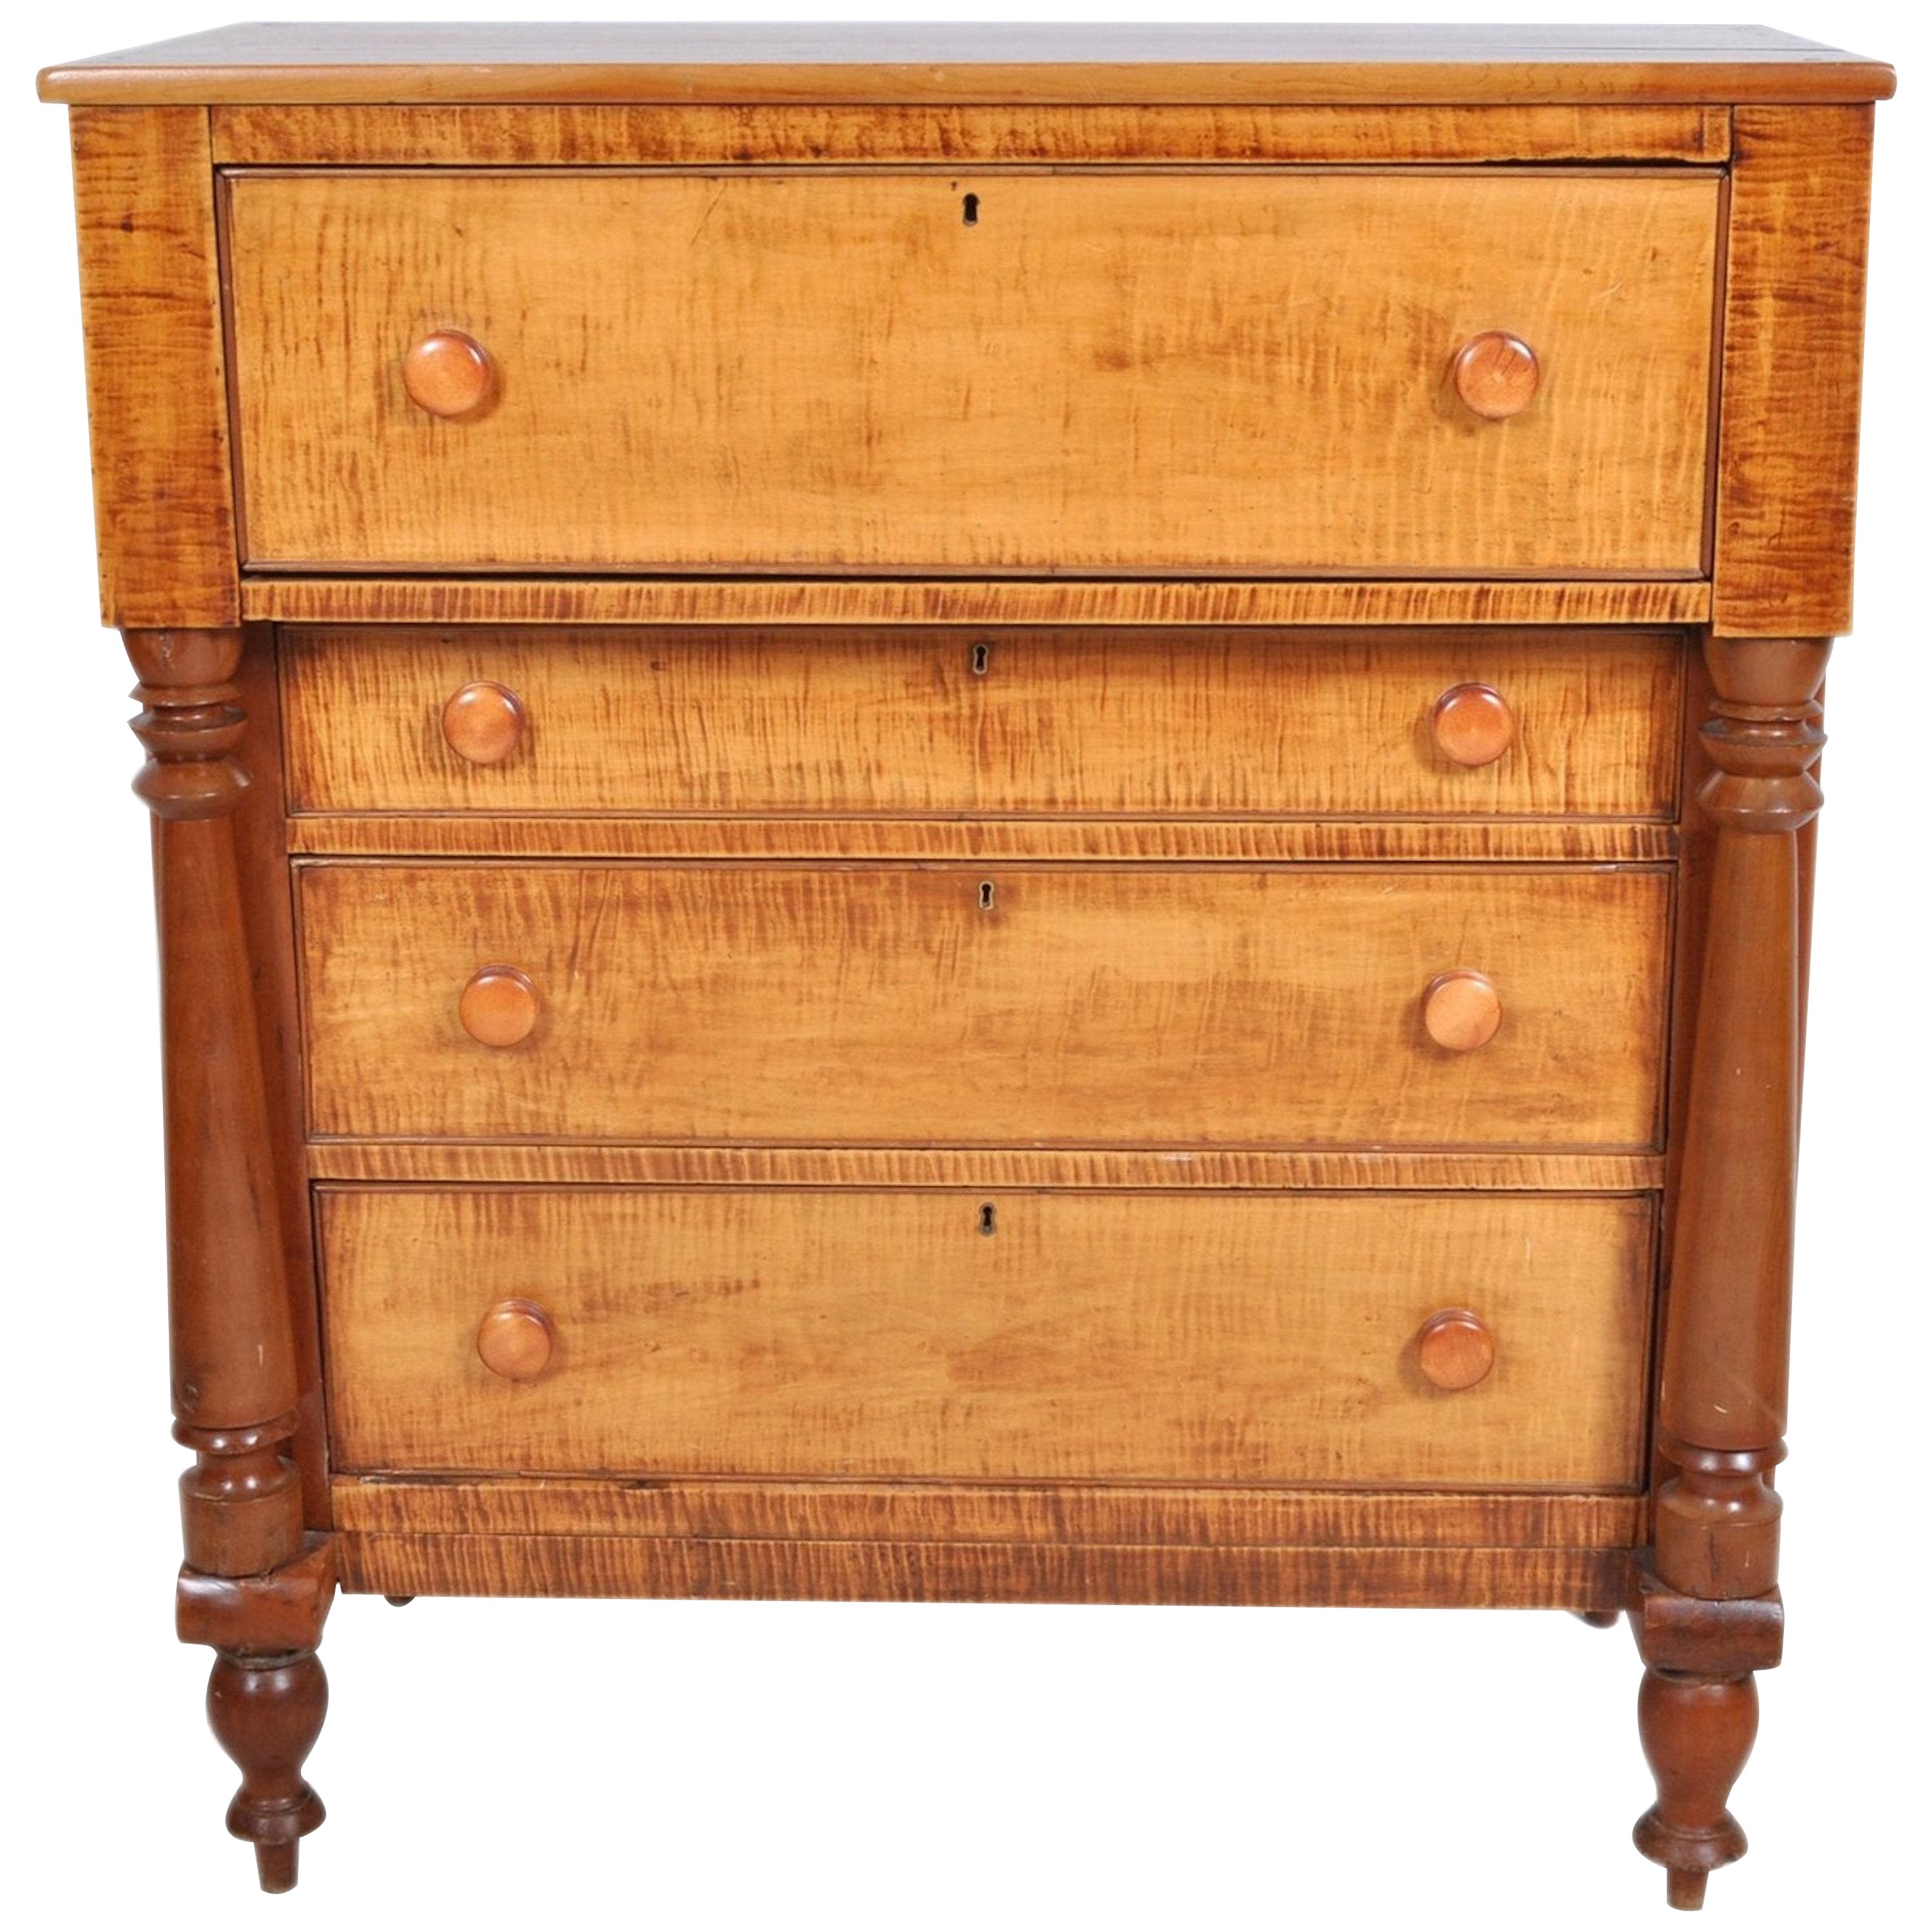 Antique Pennsylvanian 'Tiger Maple' Chest of Drawers, circa 1840